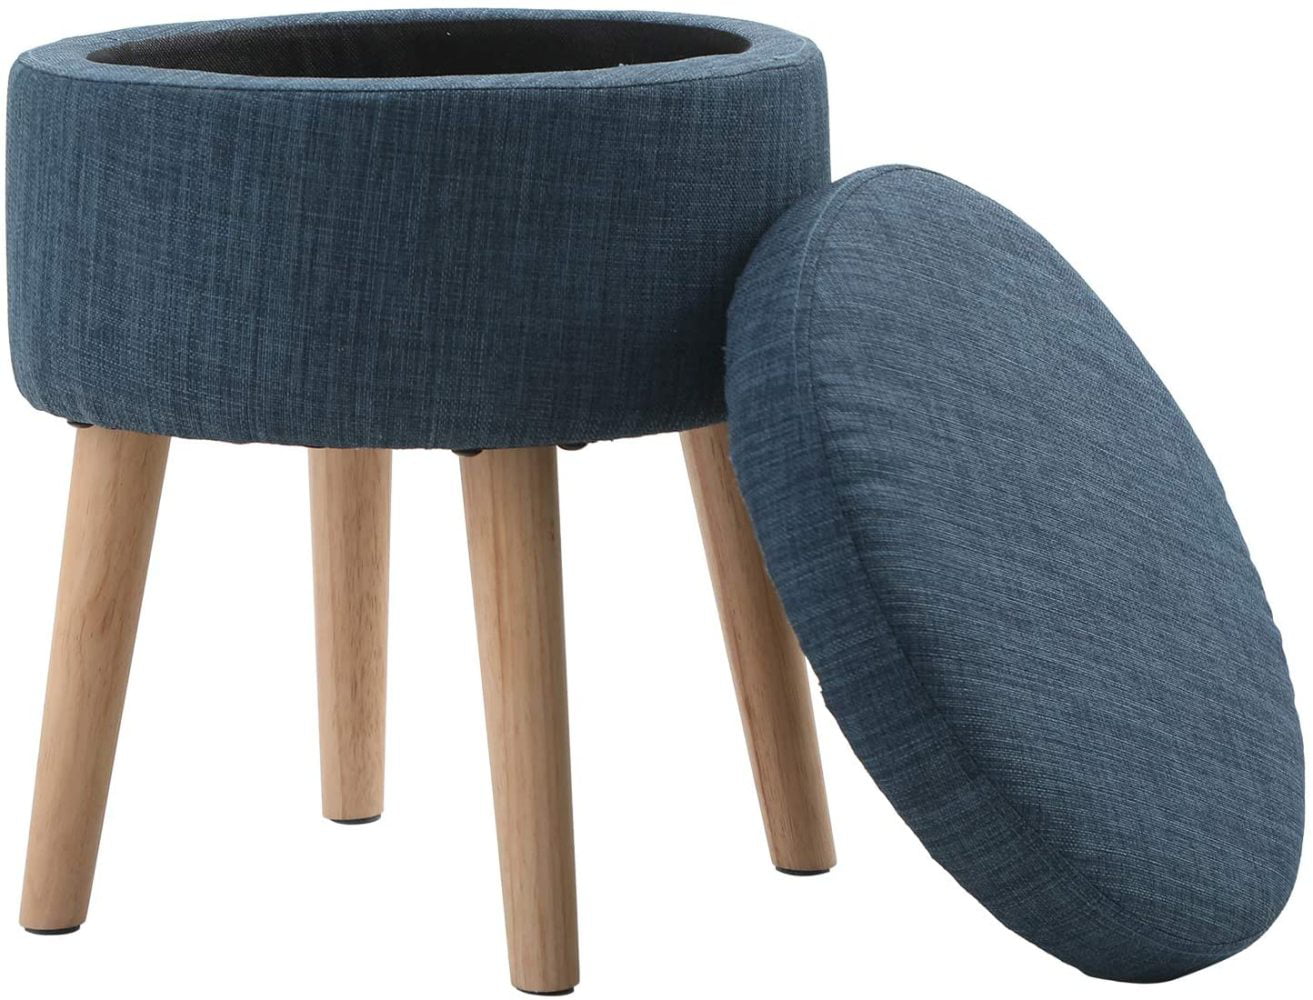 Sophia & William Round Storage Ottoman Footrest Stool with Removable Lid Side Table Seat Padded Linen with Wood Legs Upholstered Decorative Furniture Rest for Living Room Bedroom-Midnight Navy